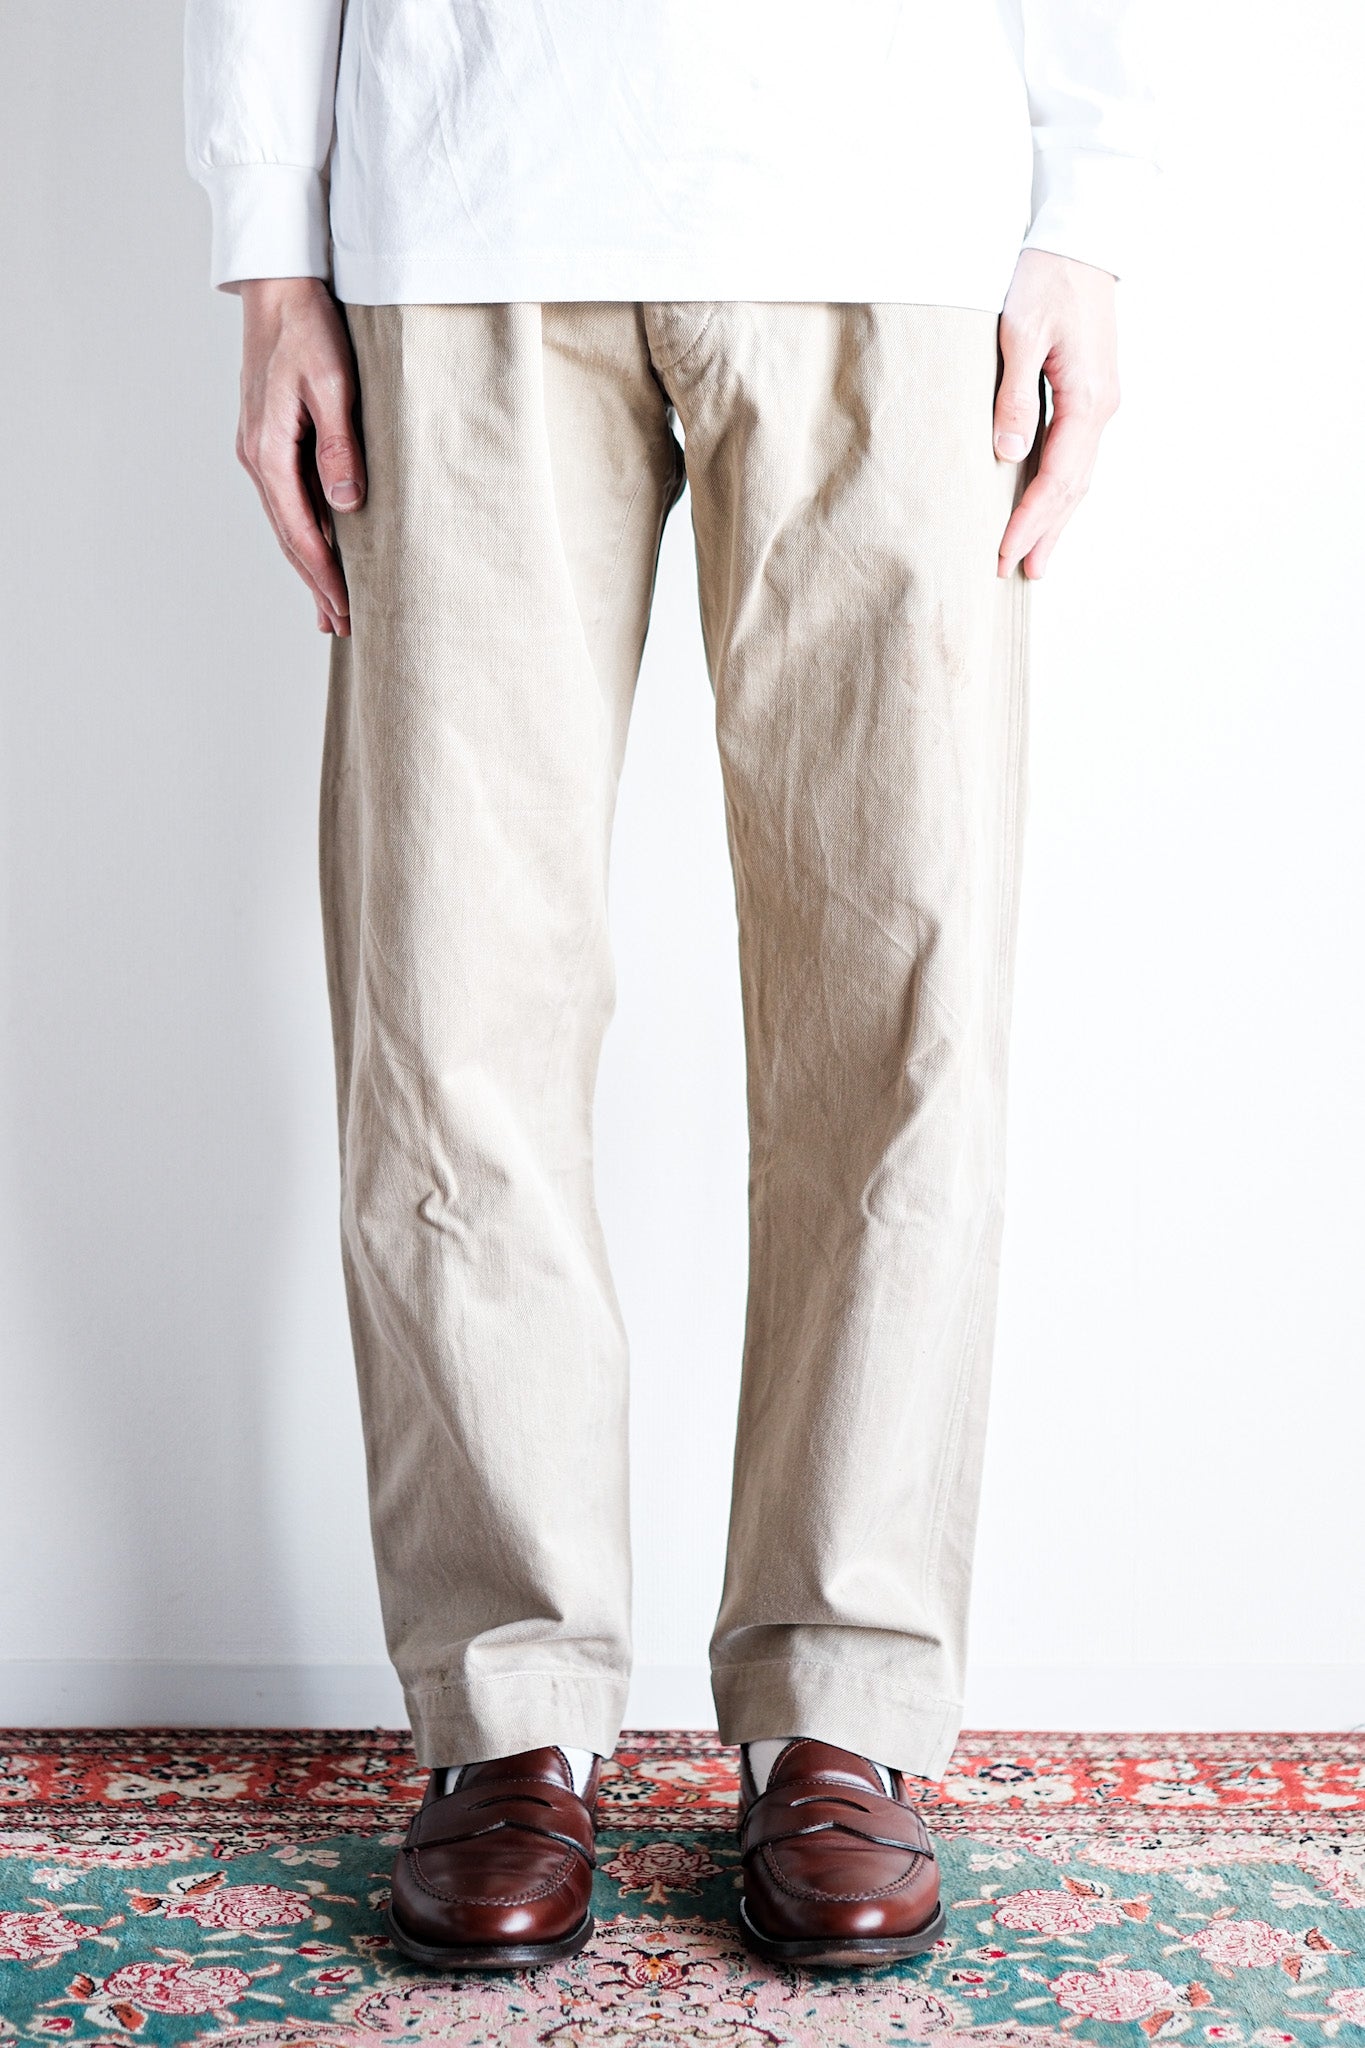 [~ 60's] French Army M52 CHINO TROUSERS